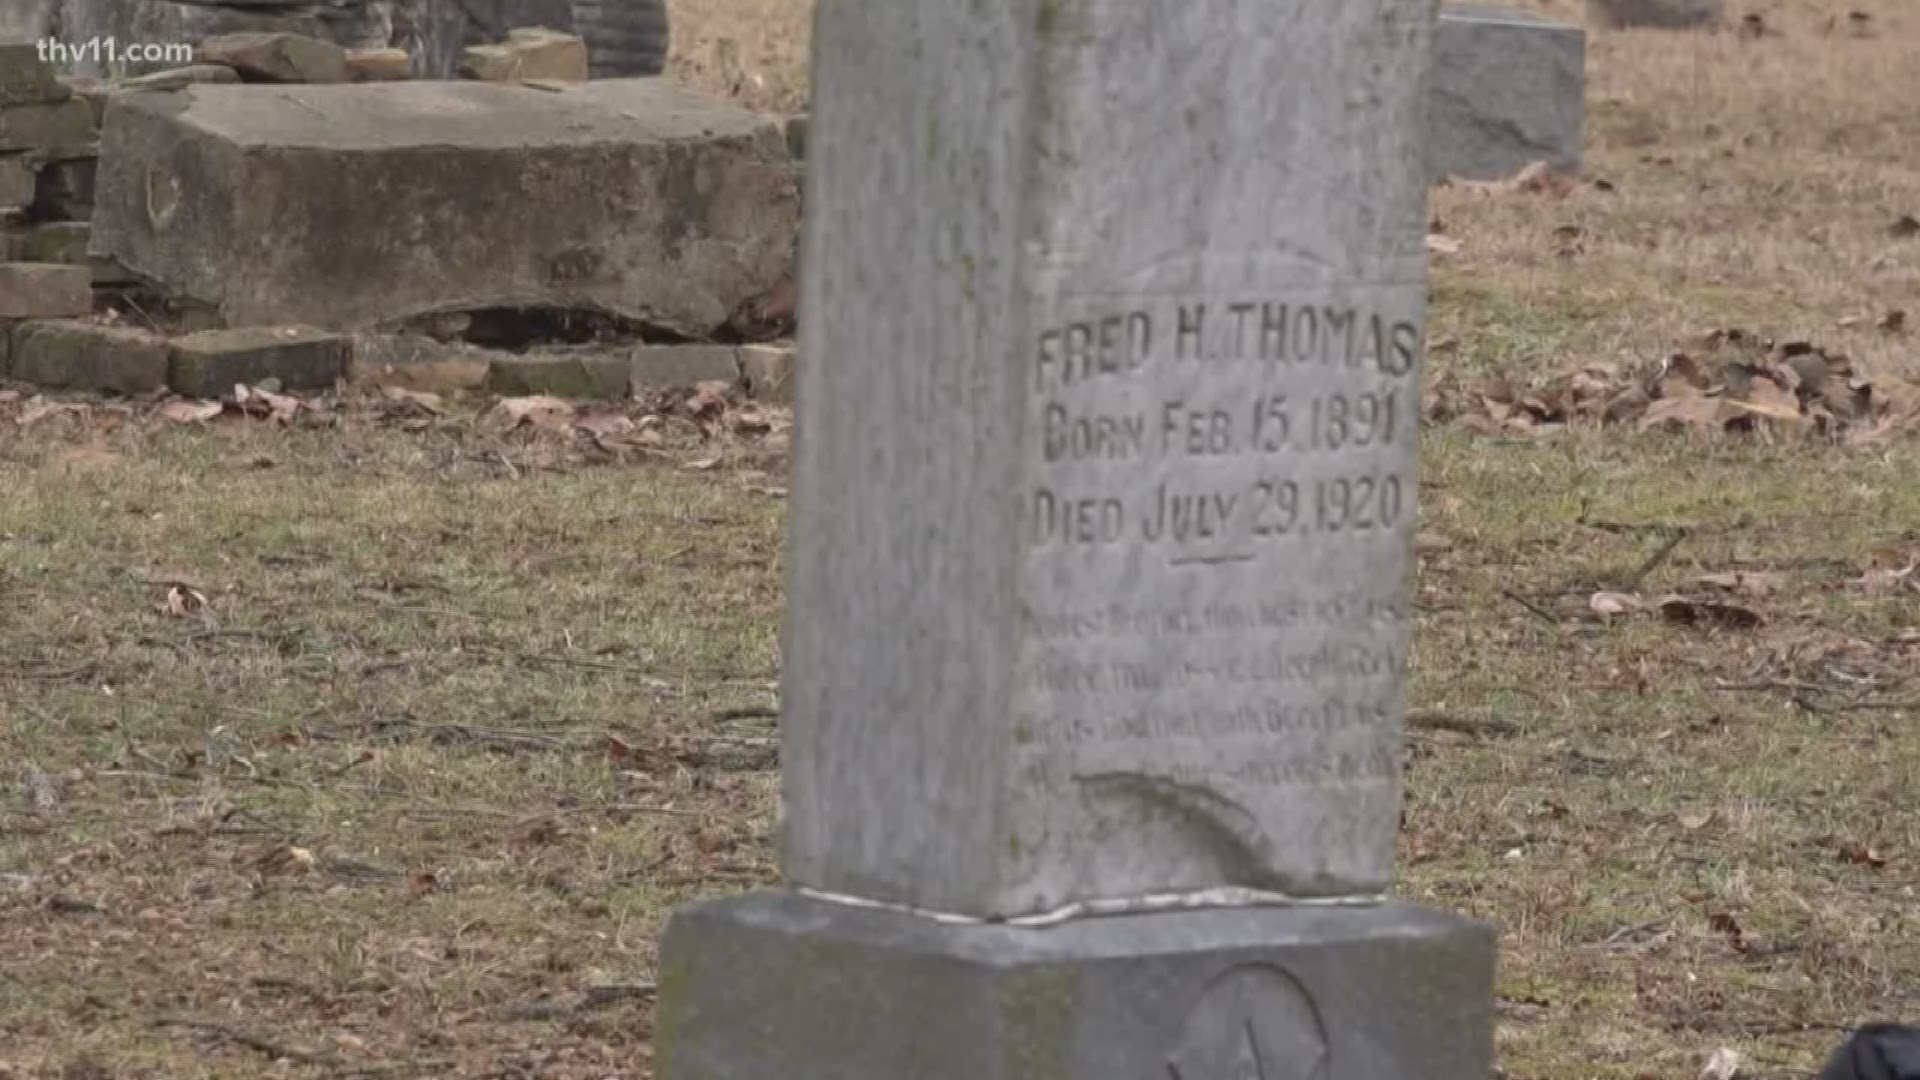 An old cemetery in North Little Rock is using new technology to bring it back to life. Or at least the parts we can see here above ground.